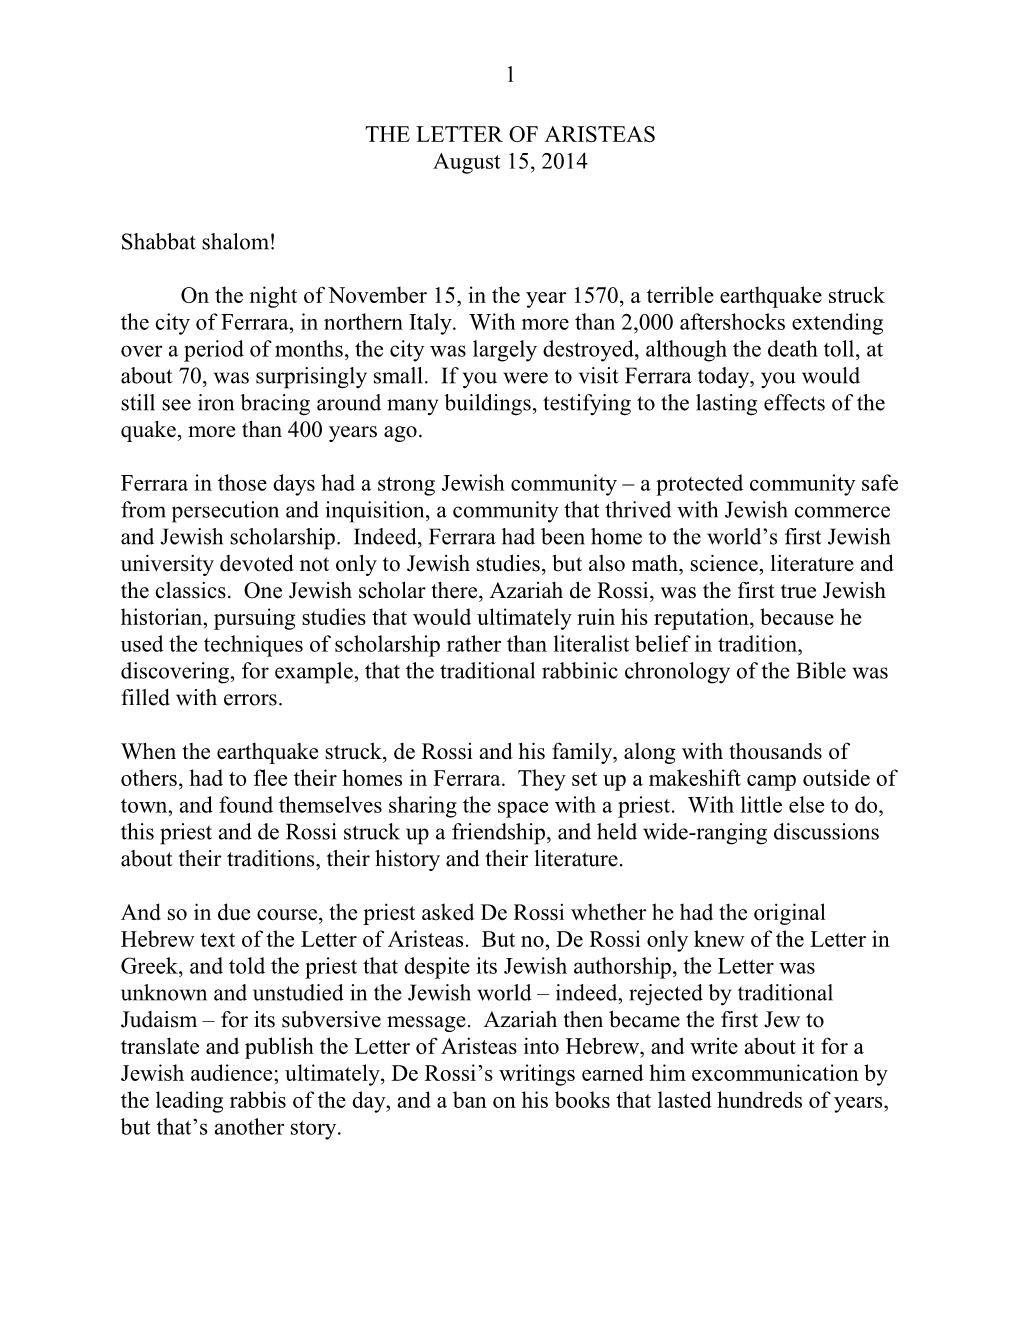 THE LETTER of ARISTEAS August 15, 2014